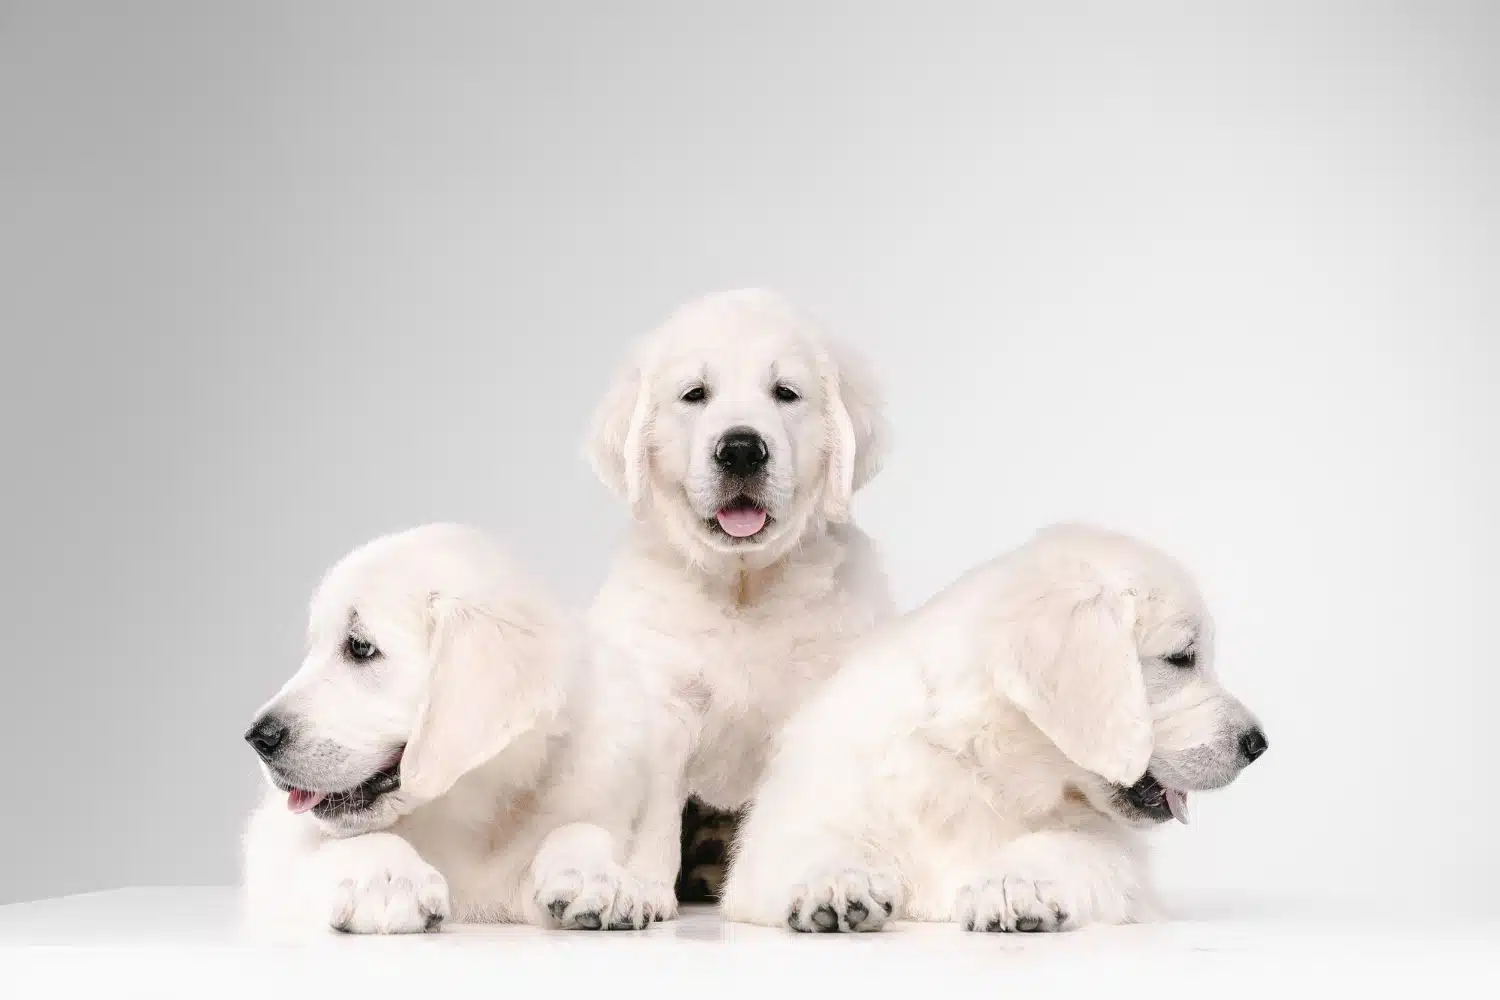 3 Bichon Frises together for photoshoot